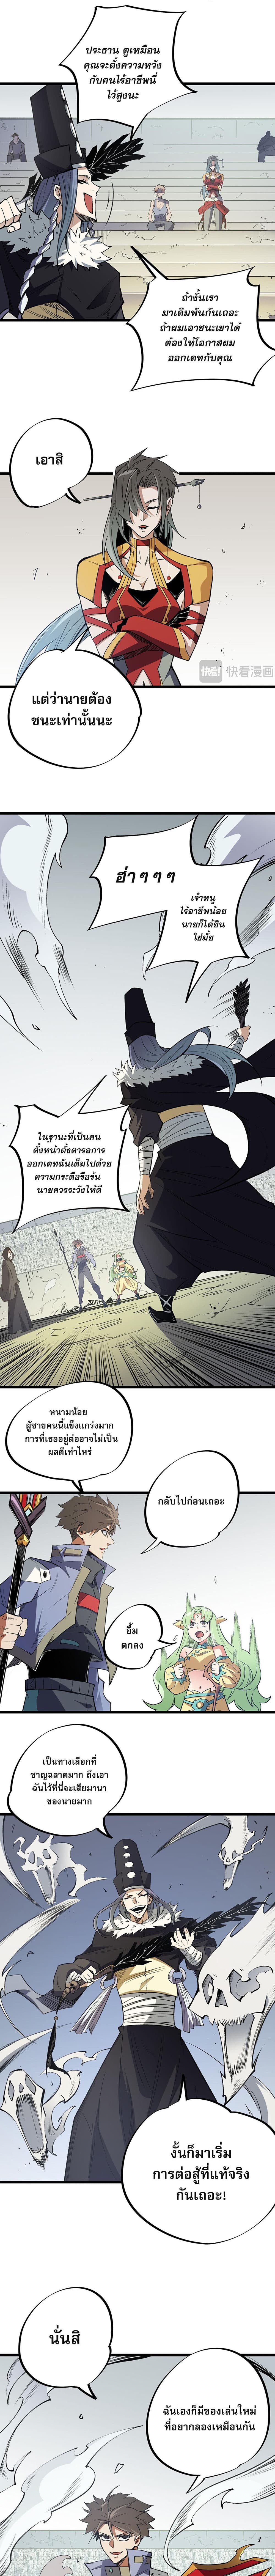 Job Changing for the Entire Population: The Jobless Me Will Terminate the Gods ฉันคือผู้เล่นไร้อาชีพที่สังหารเหล่าเทพ 57-57